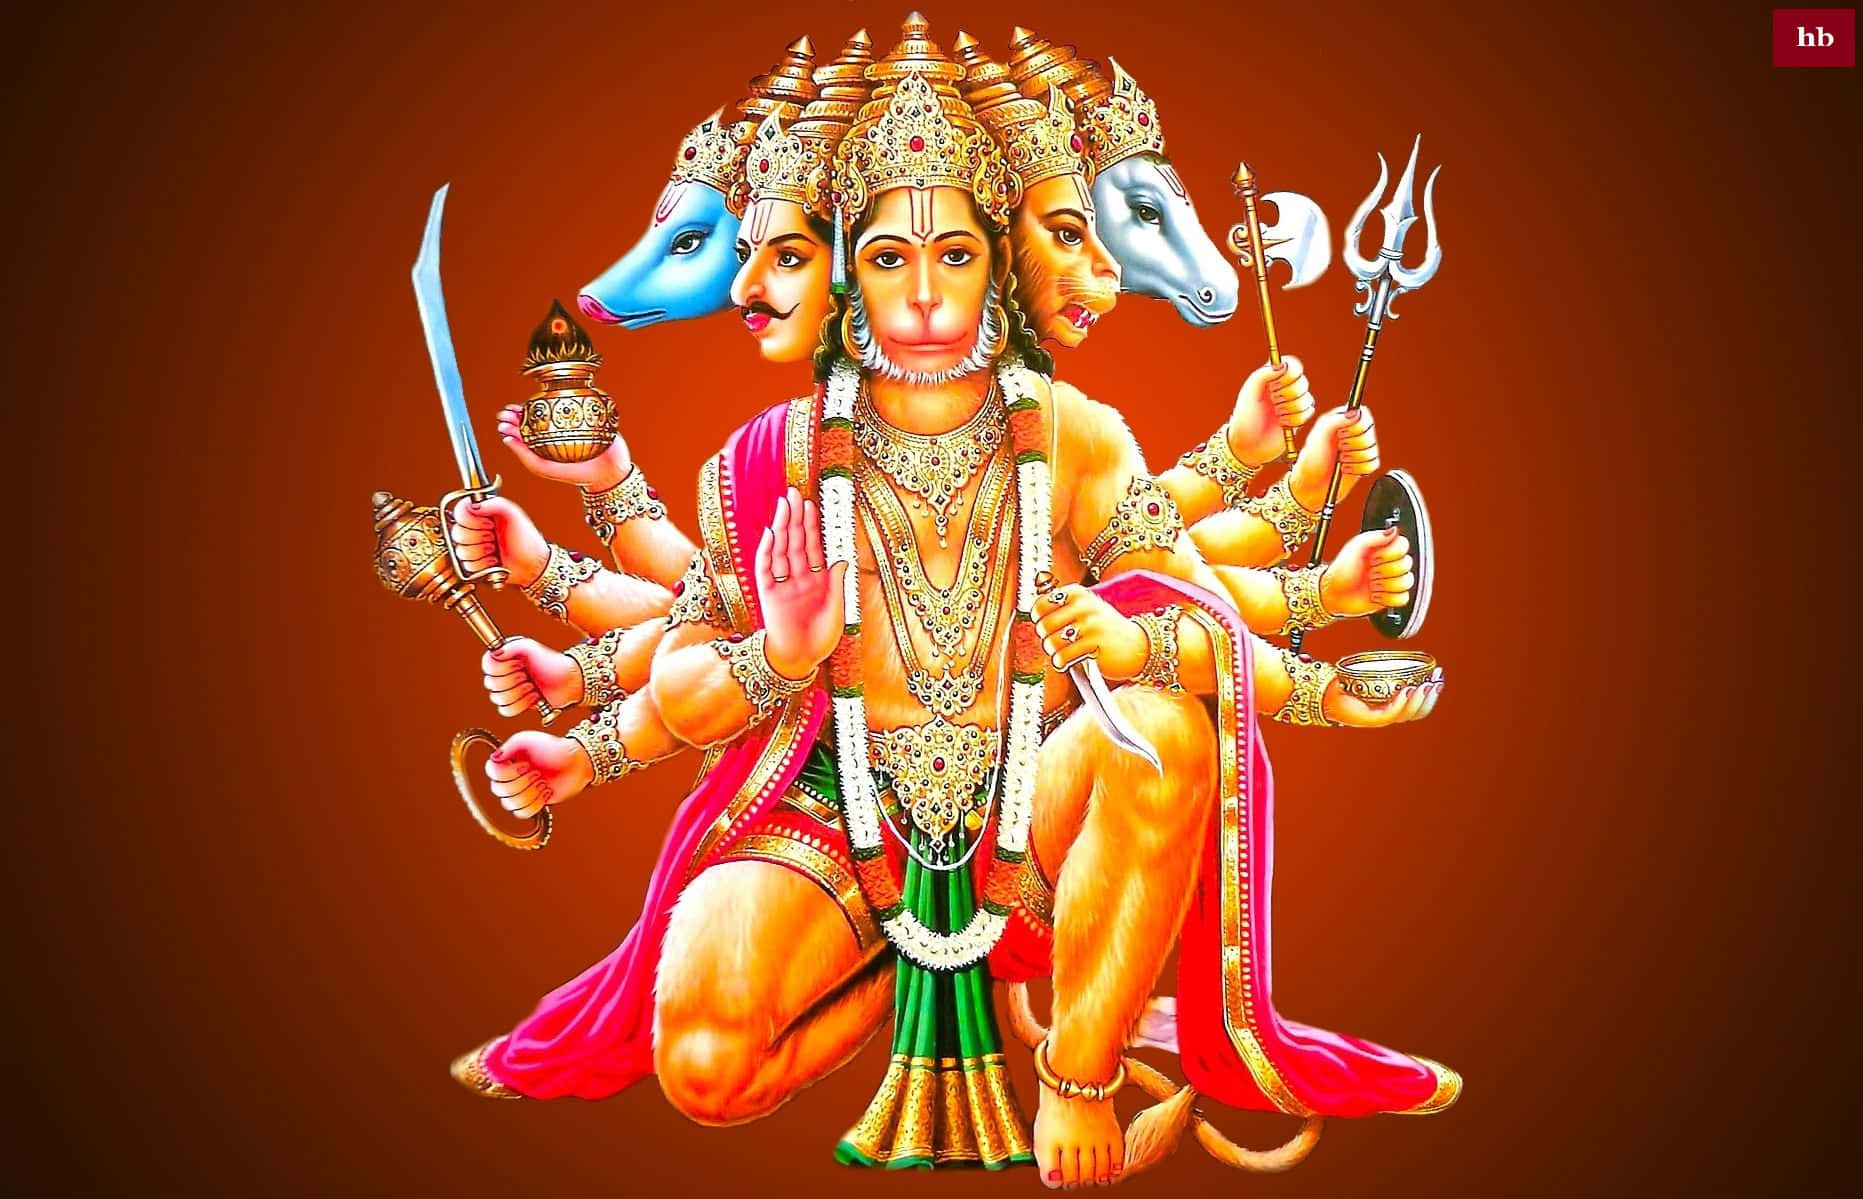 Hanuman offering his assistance in order to protect Rama